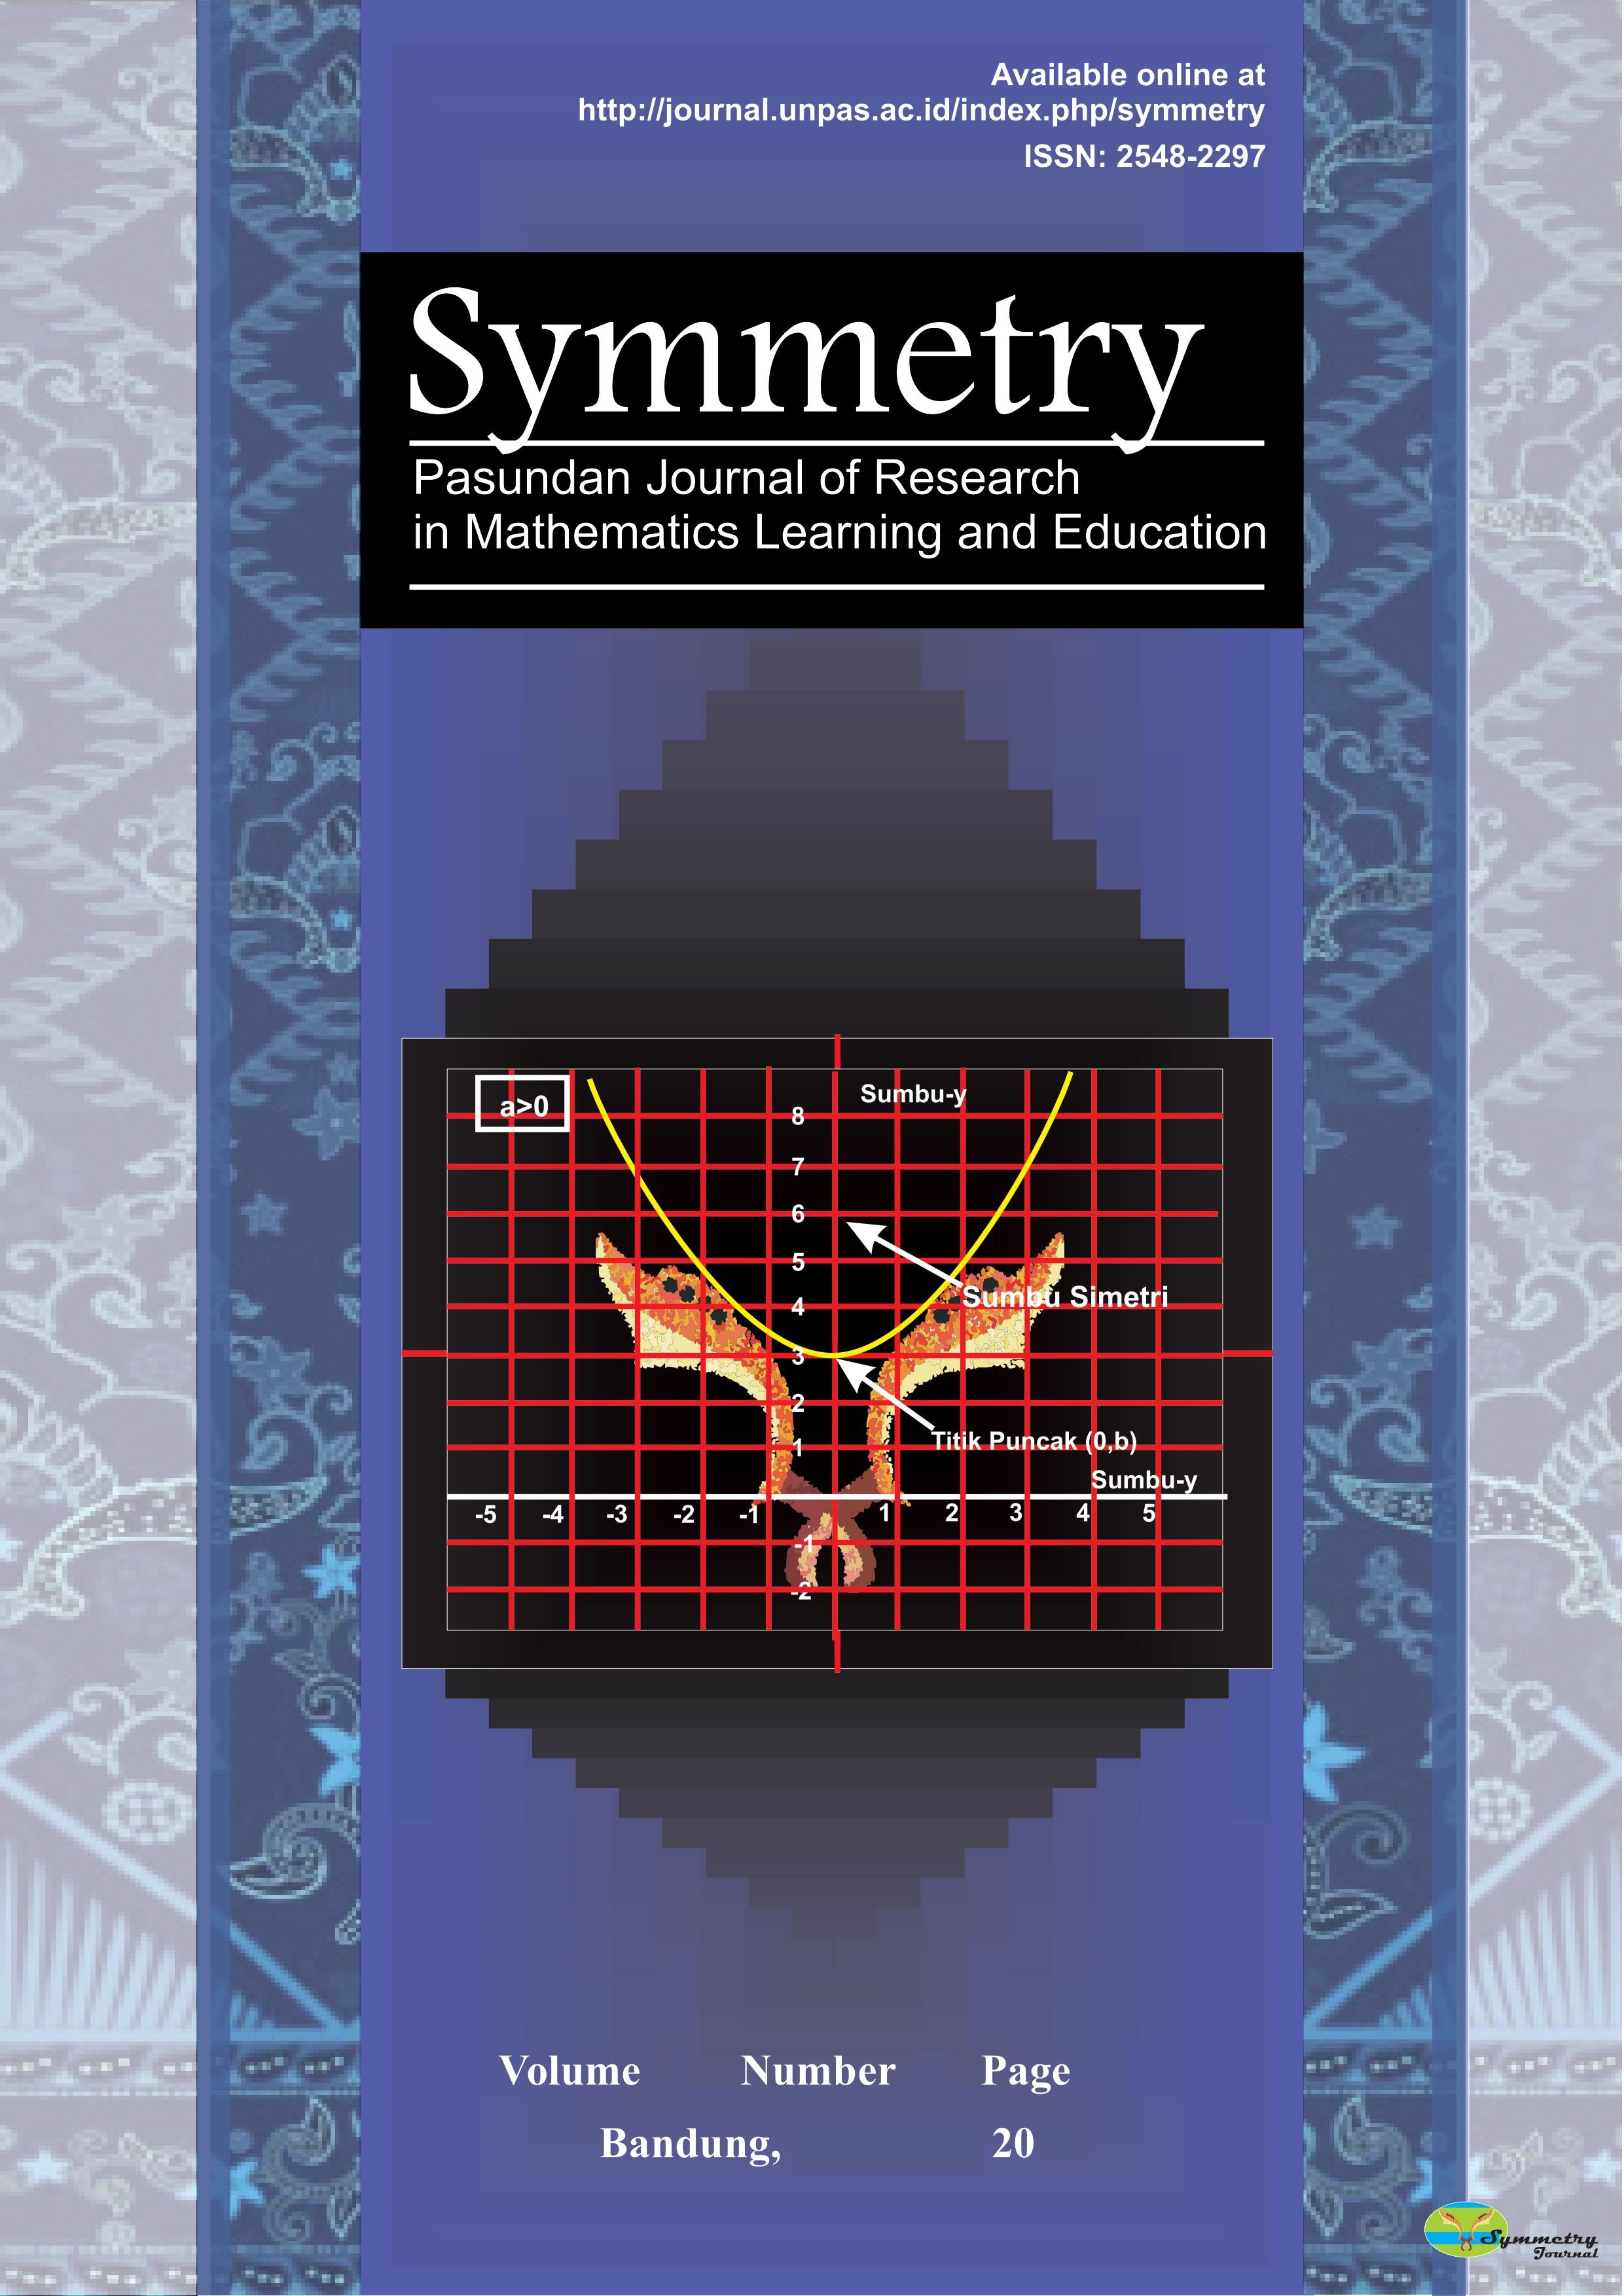 					Lihat Vol 8 No 1 (2023): Symmetry: Pasundan Journal of Research in Mathematics Learning and Education
				